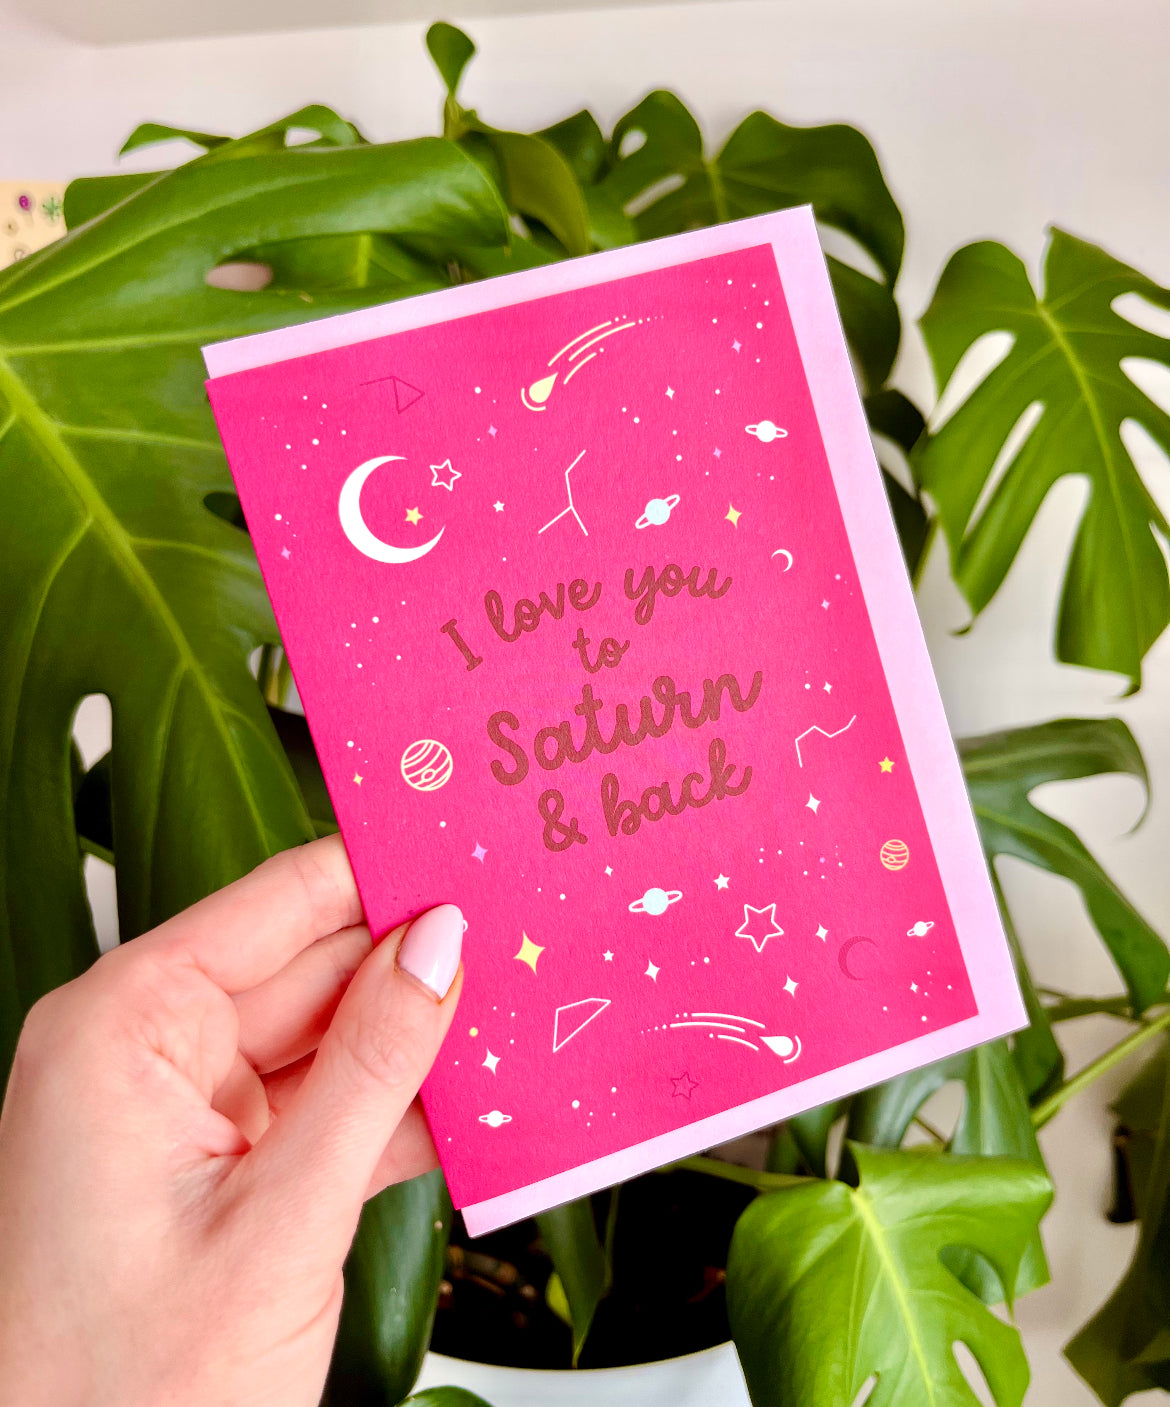 Love You to Saturn Greeting Card